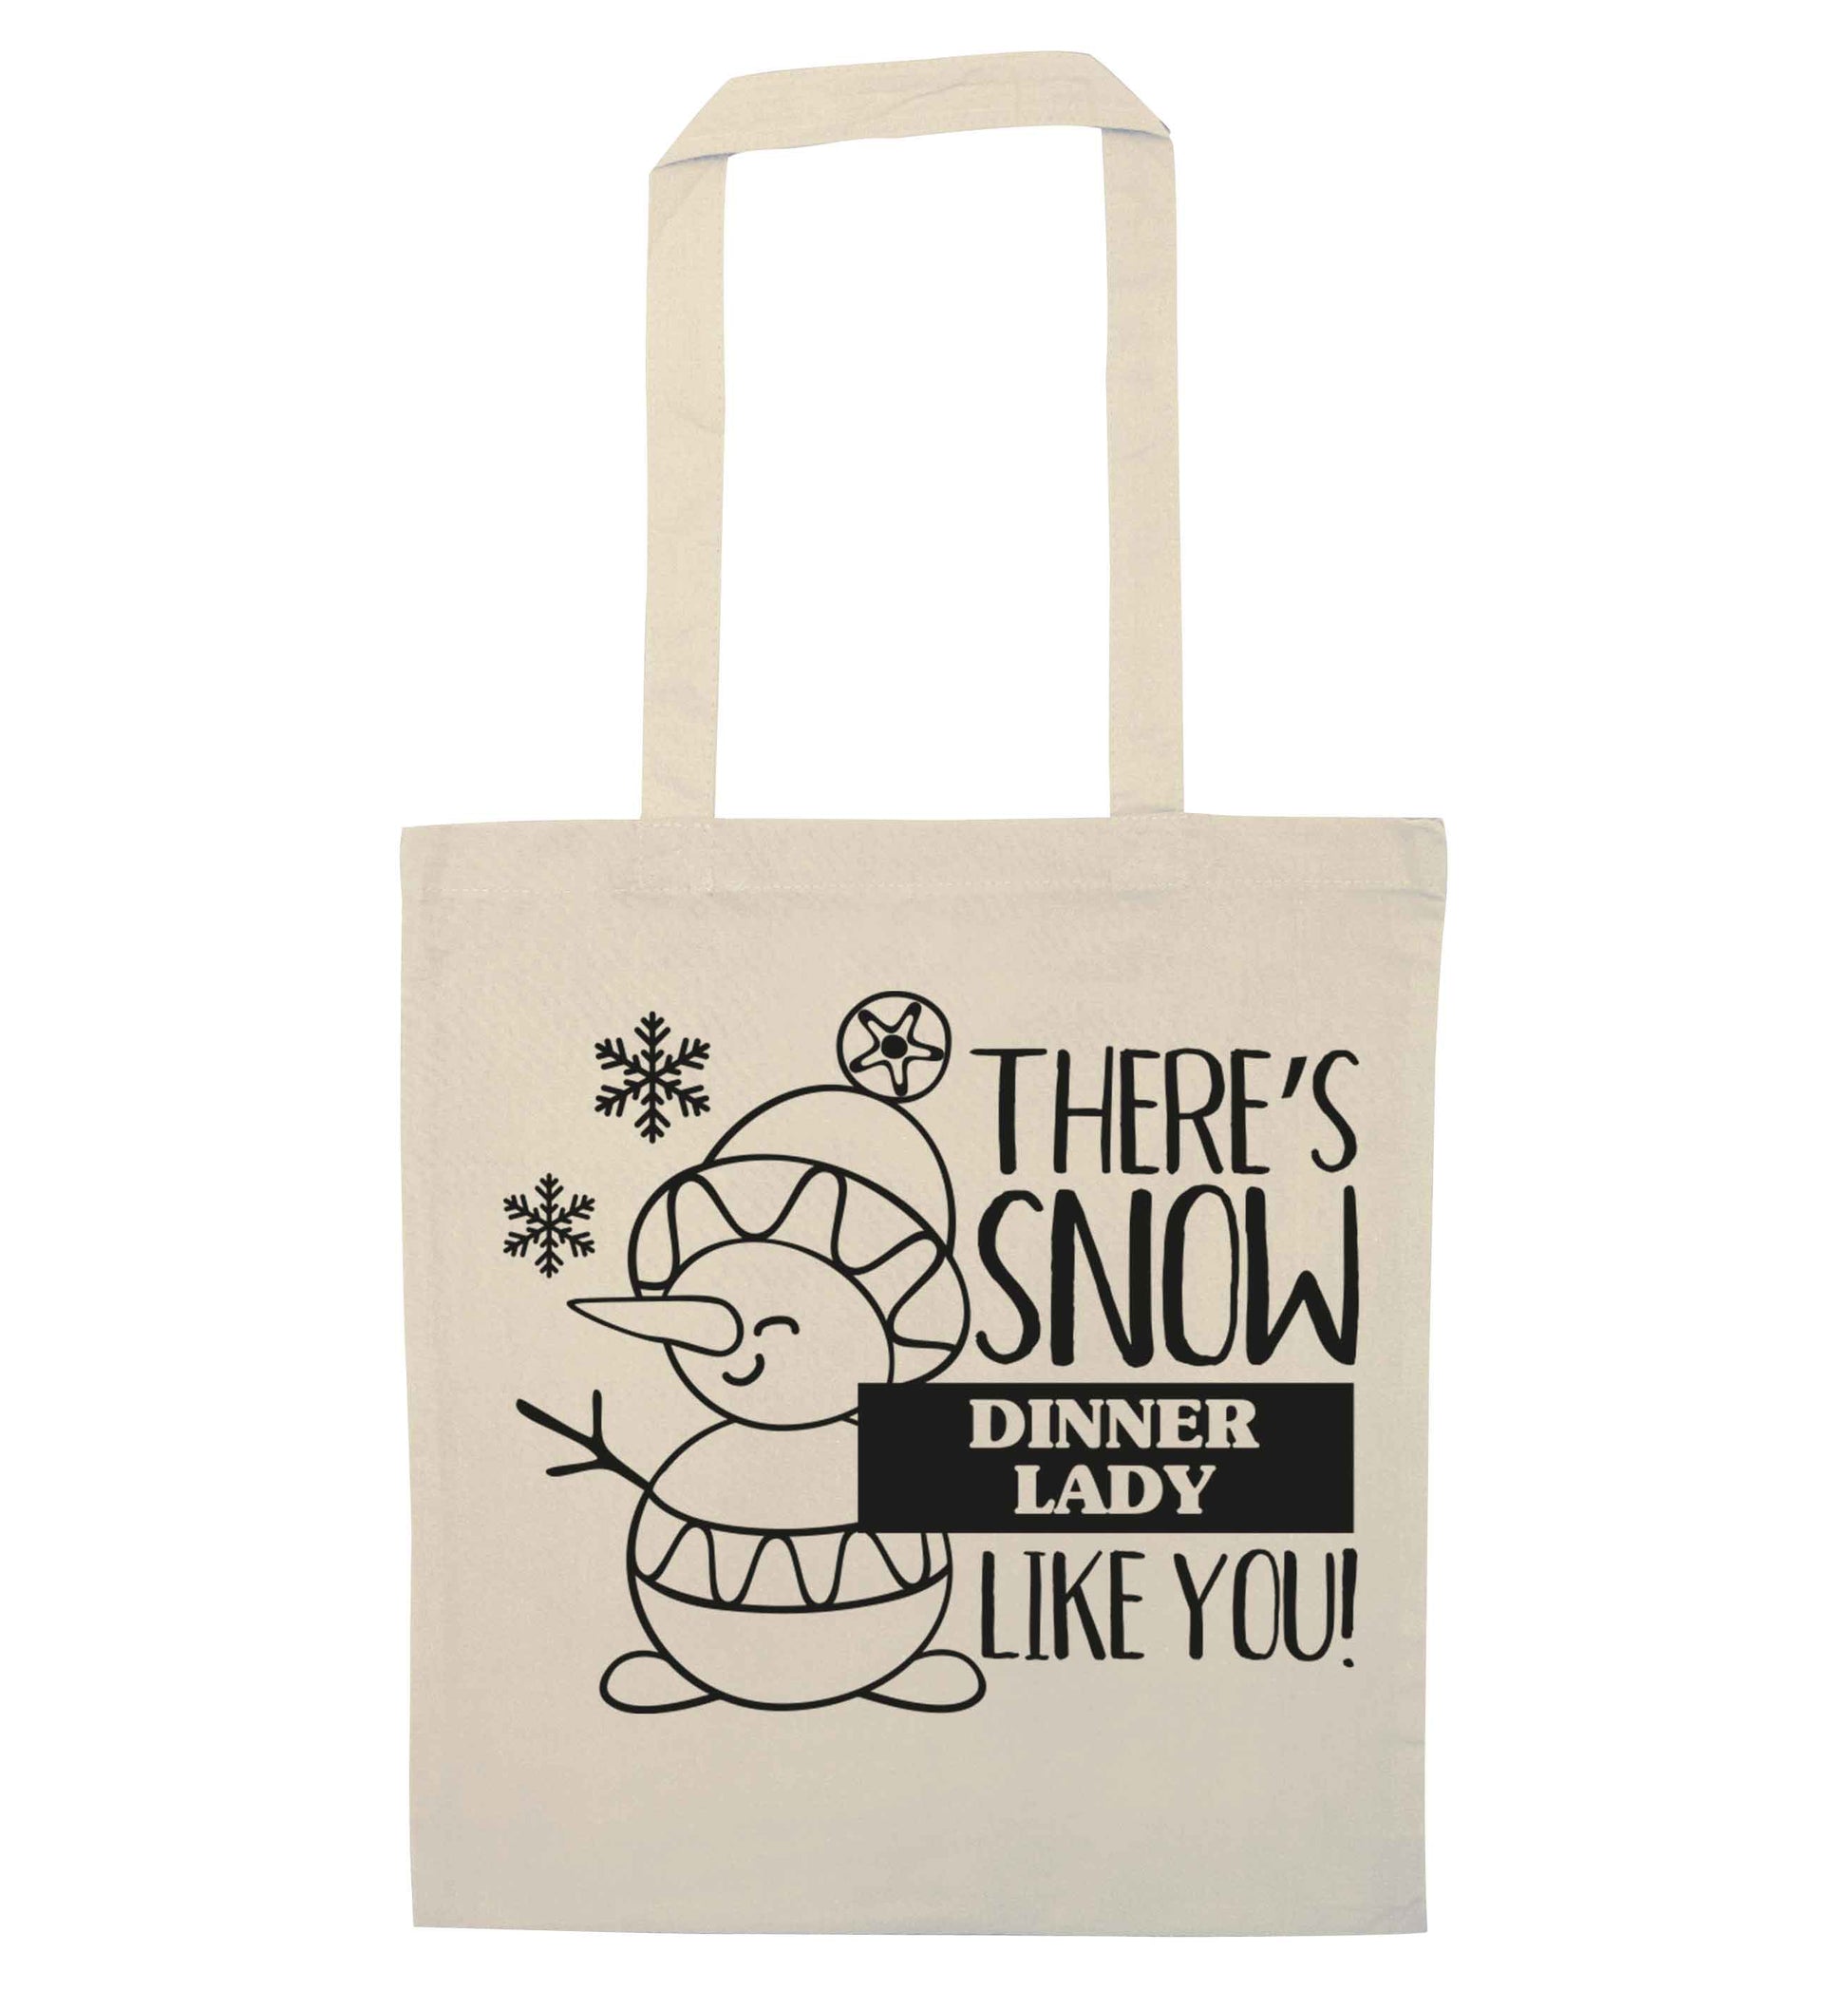 There's snow dinner lady like you natural tote bag